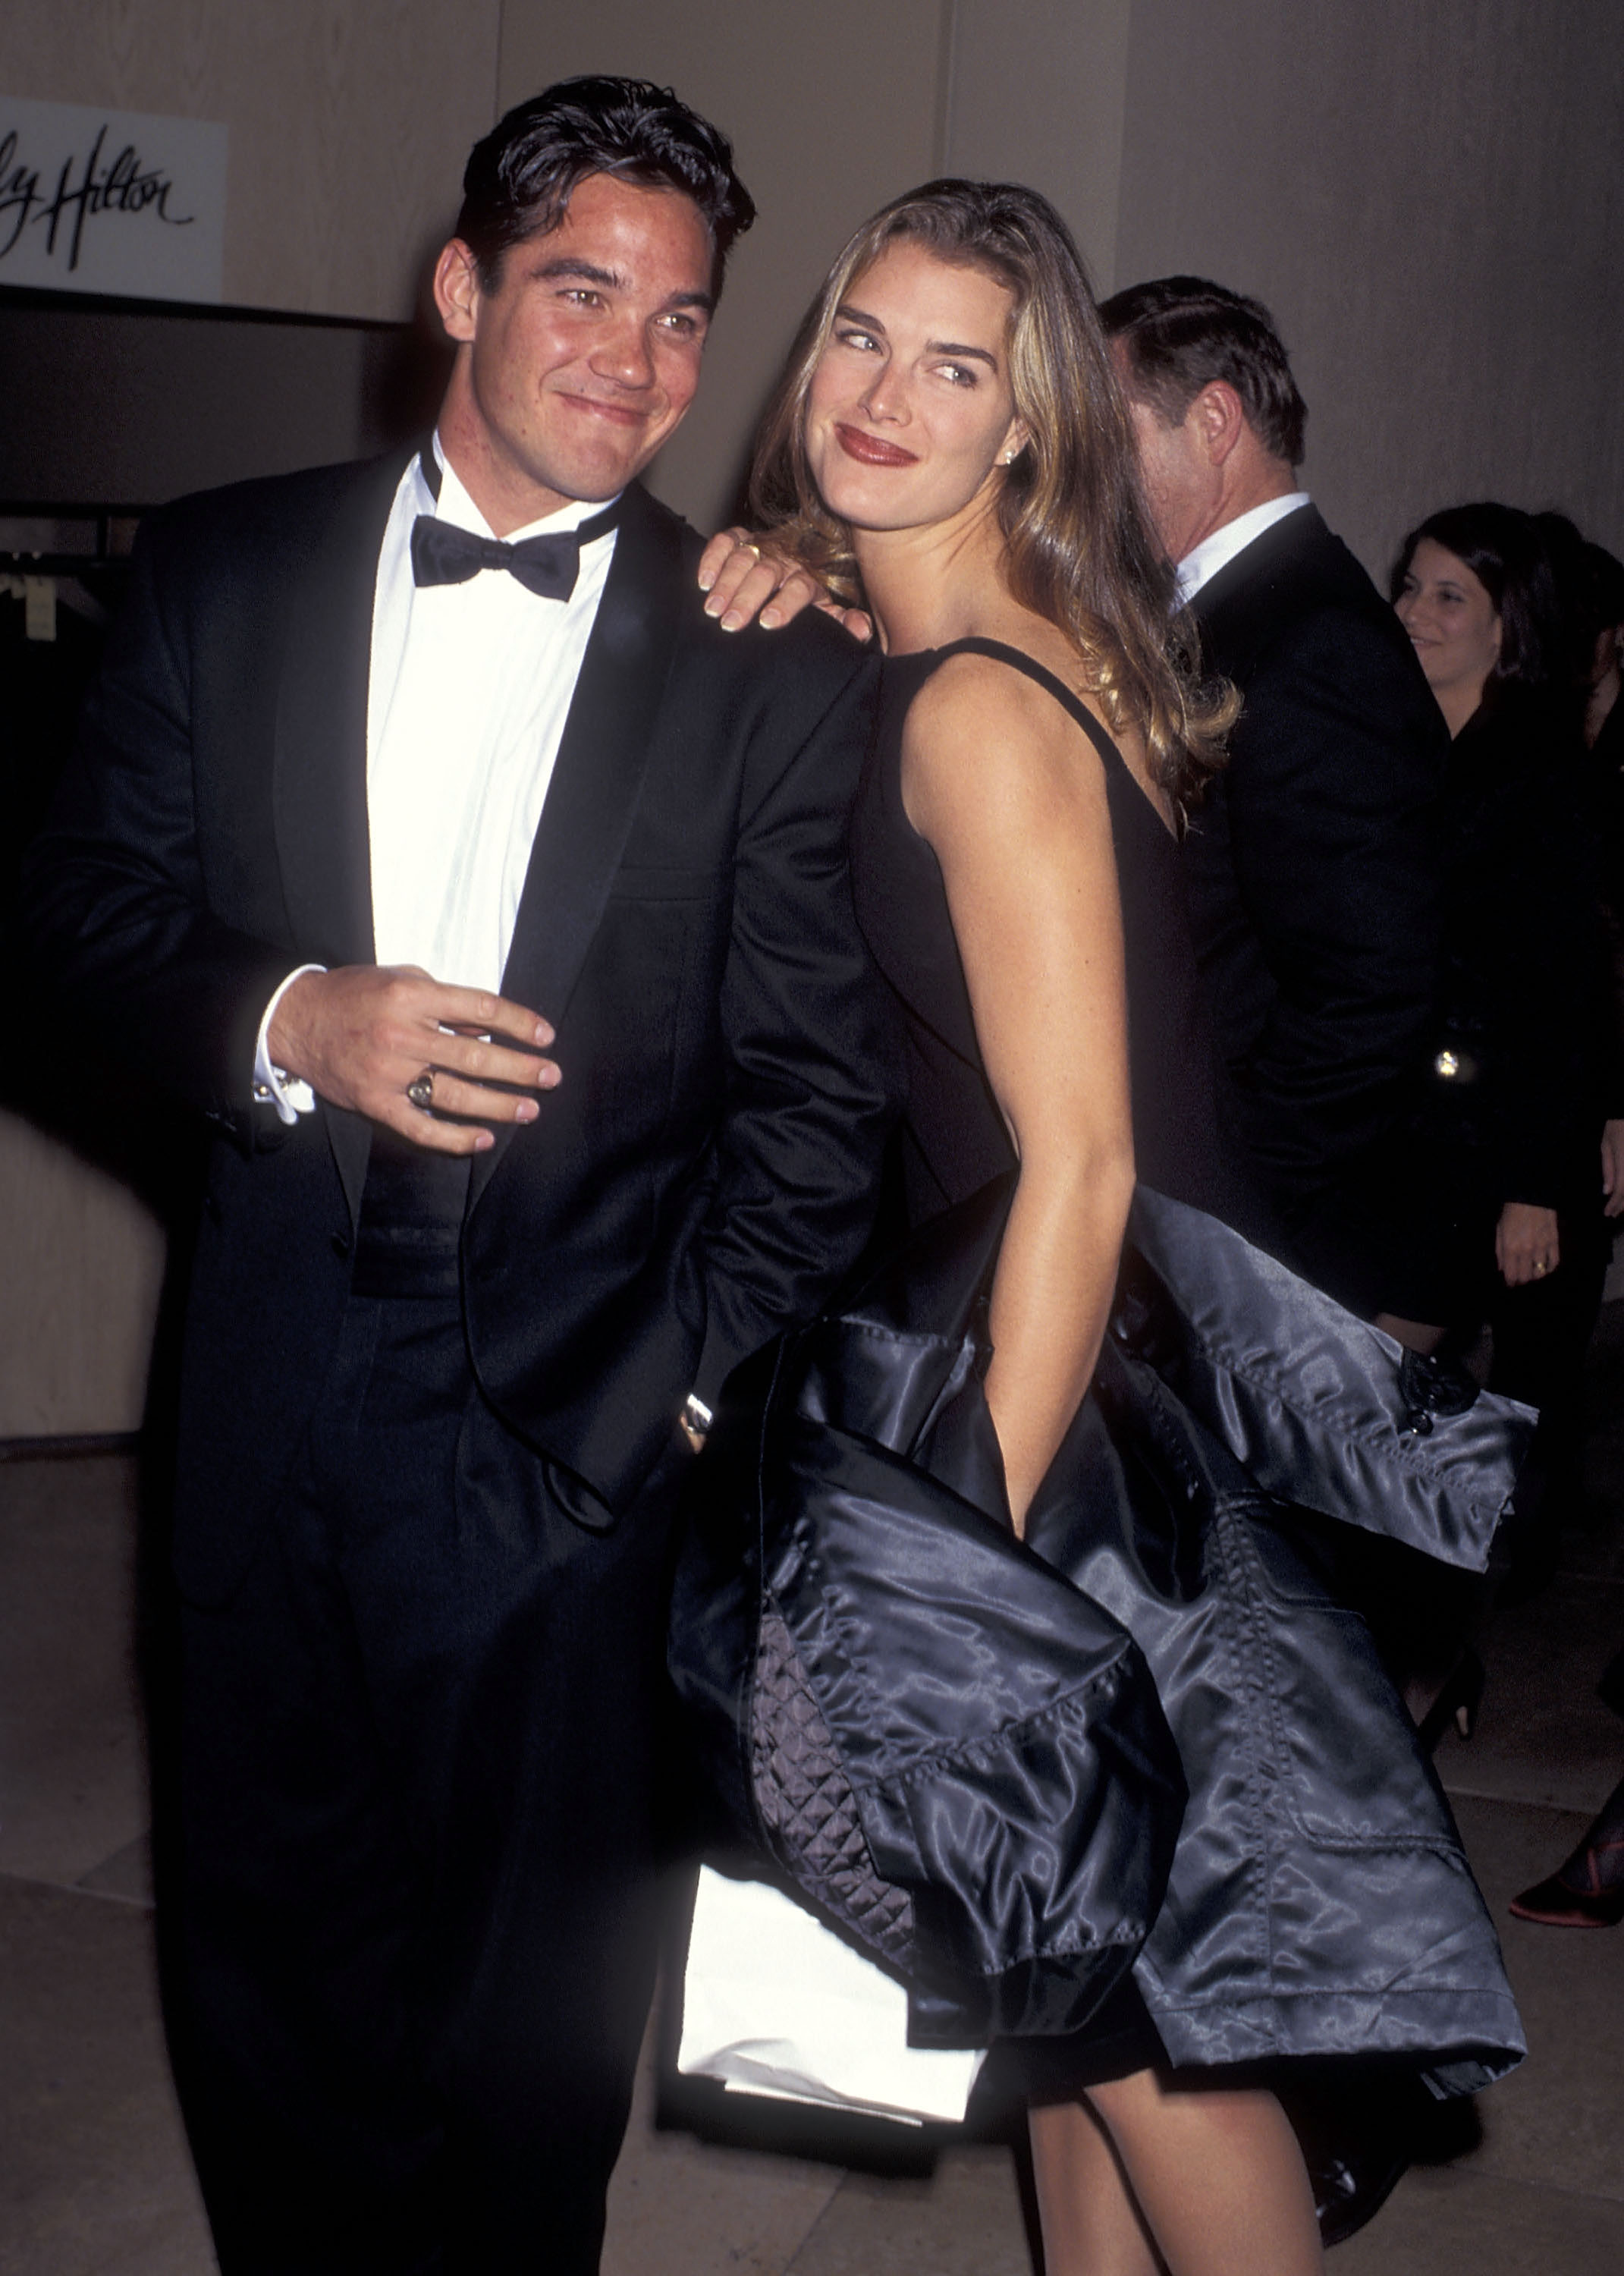 Dean Cain and Brooke Shields on November 9, 1995, in Beverly Hills, California | Source: Getty Images